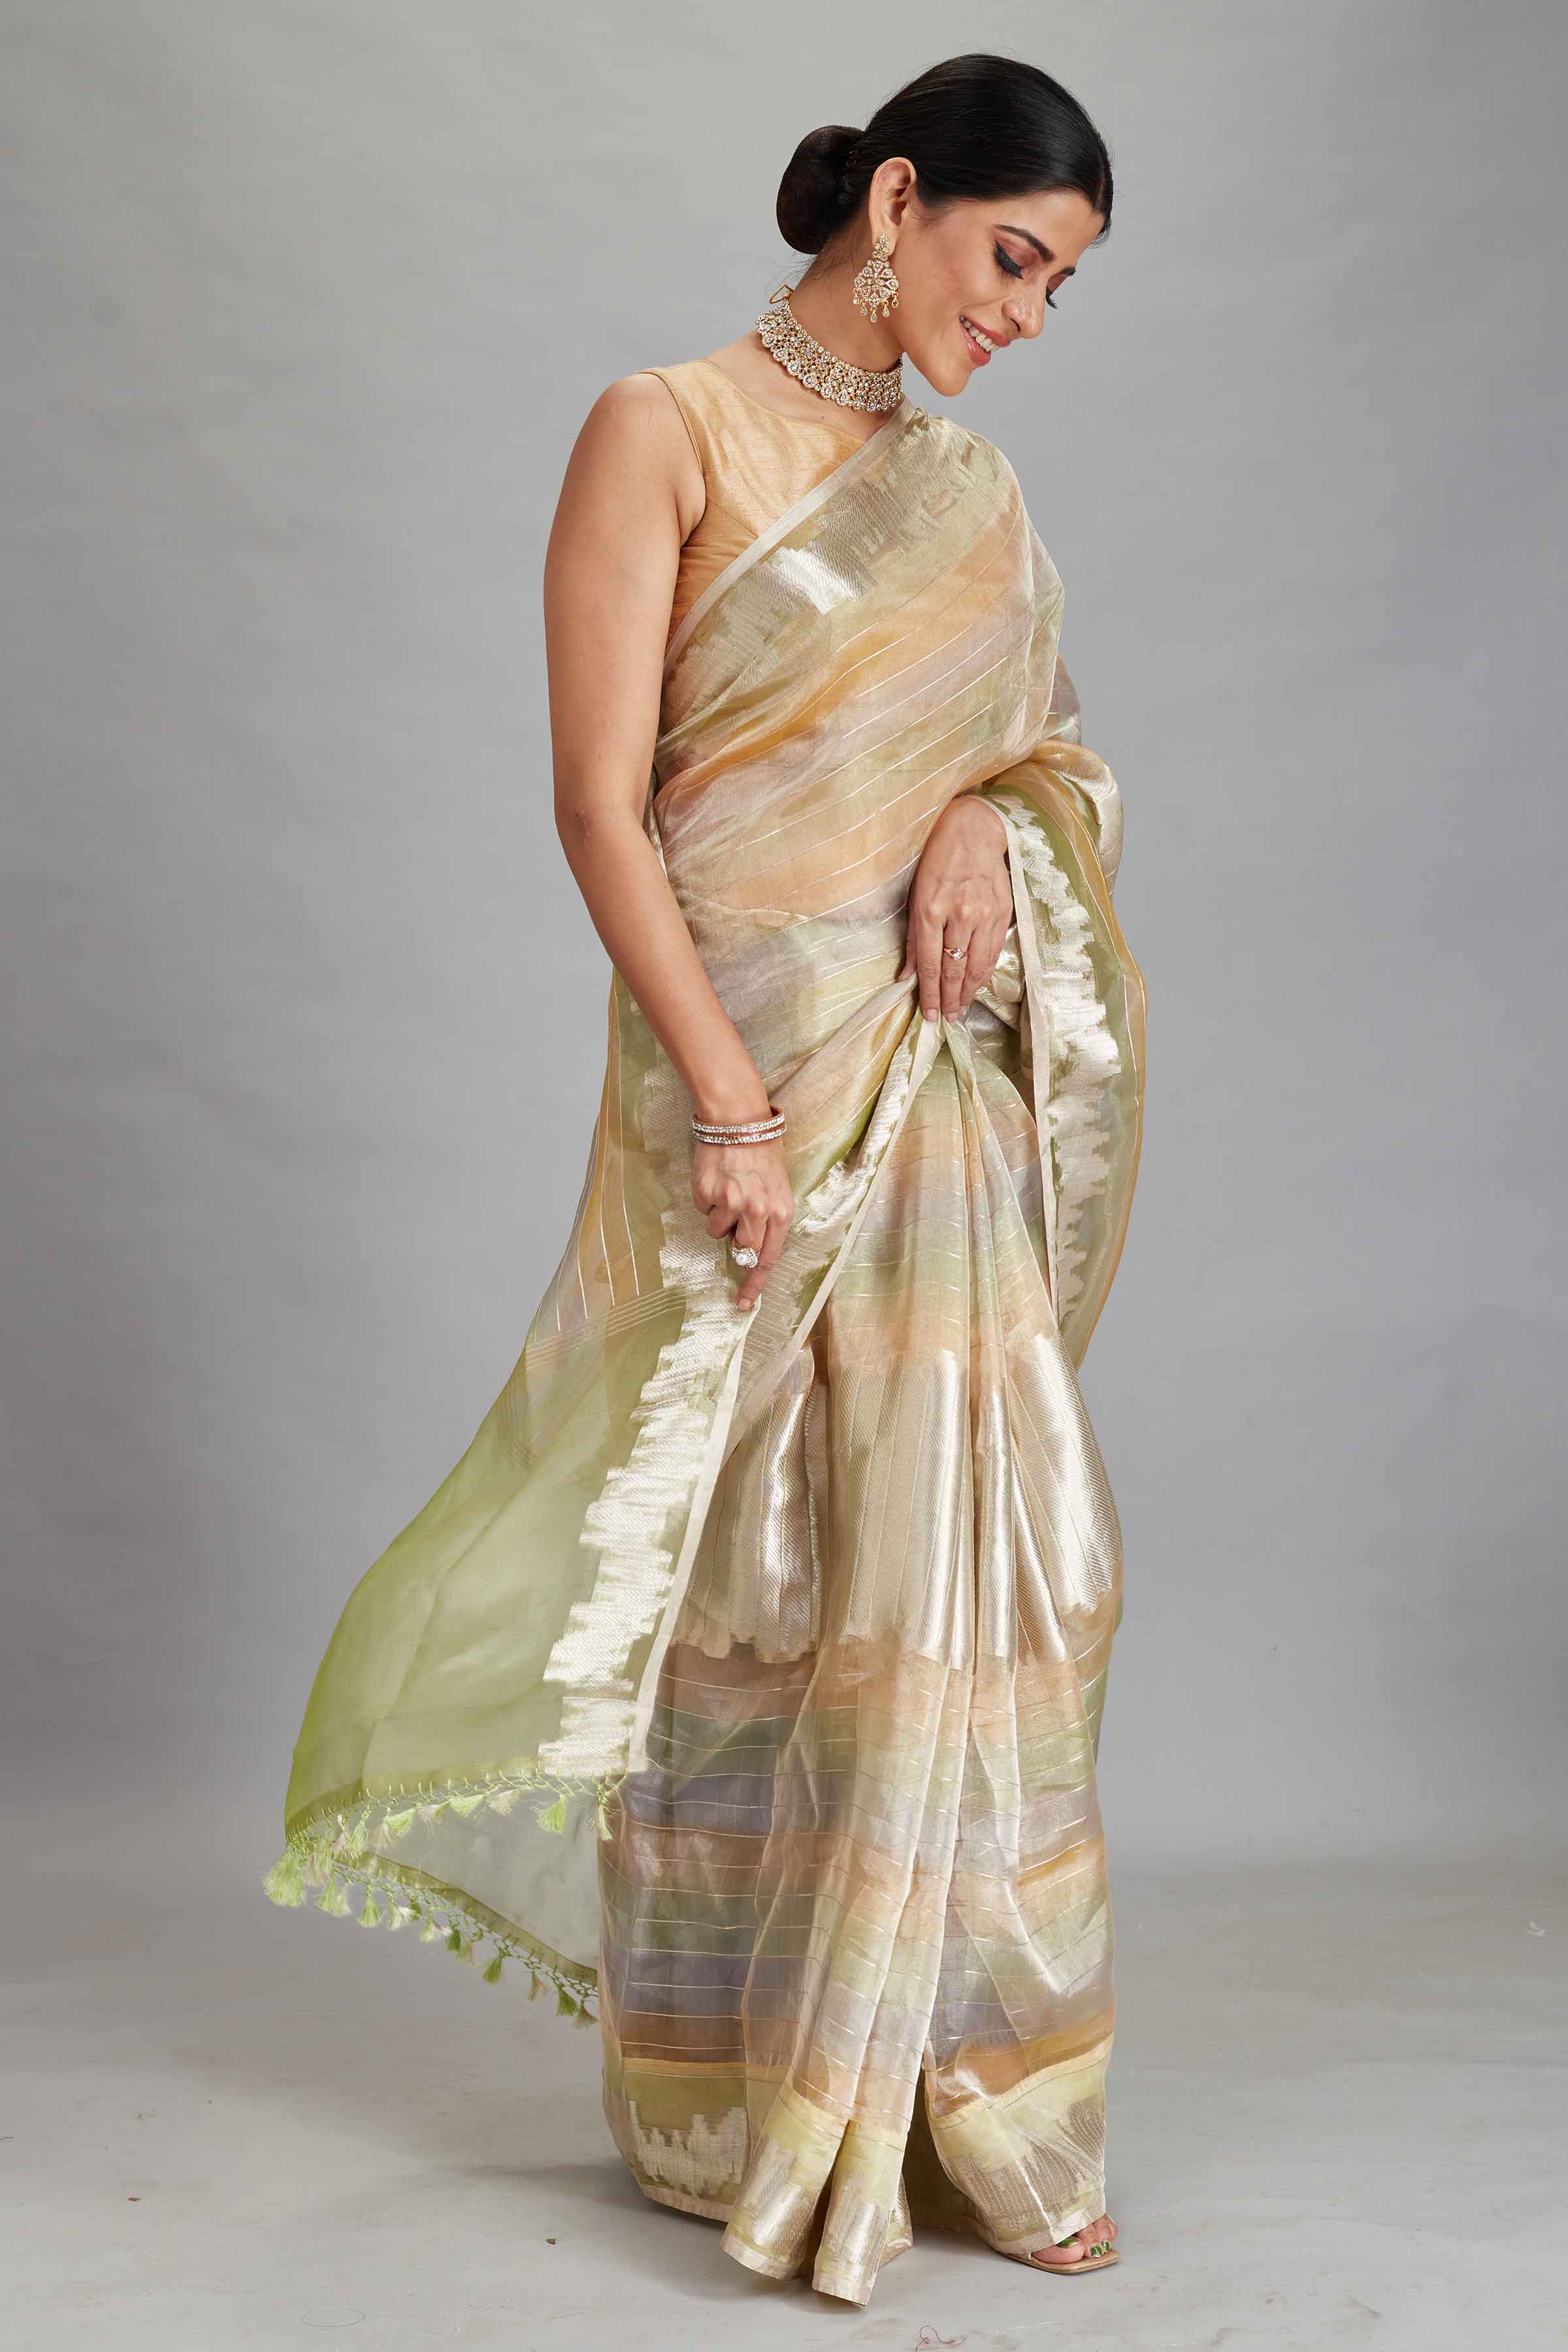 Buy green and peach striped tissue Banarasi saree online in USA. Look your best on festive occasions in latest designer sarees, pure silk sarees, Kanjivaram silk saris, handwoven saris, tussar silk sarees, embroidered saris from Pure Elegance Indian clothing store in USA.-side